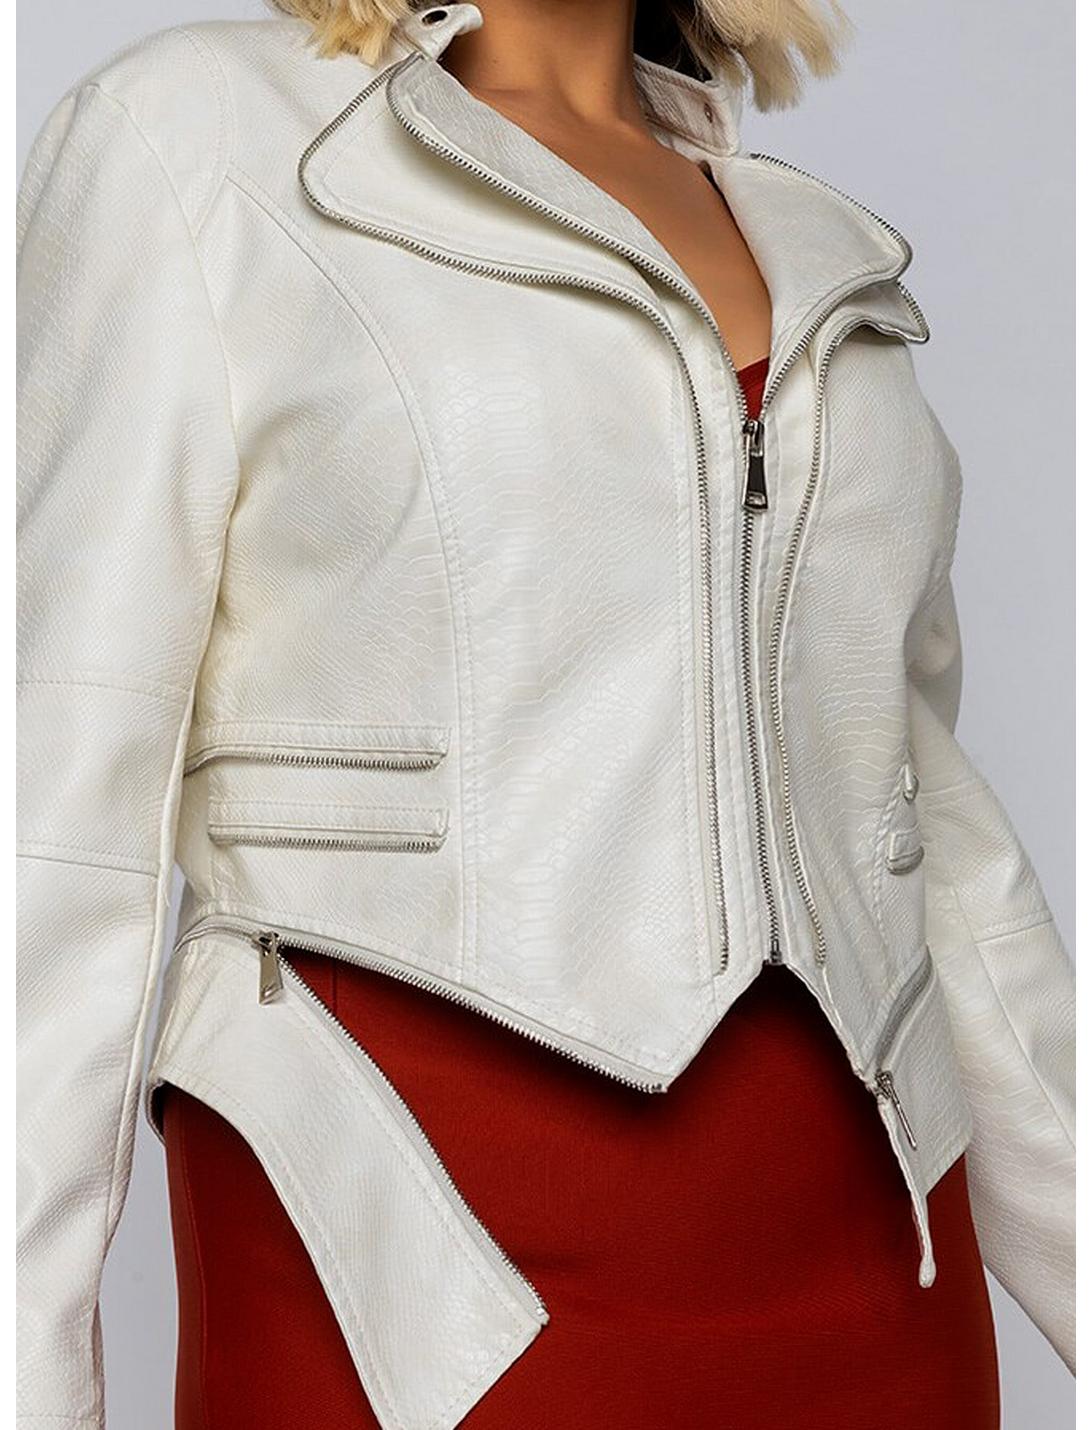 Azalea Wang Two Is Better Than One Leather Jacket Plus Size, WHITE, hi-res